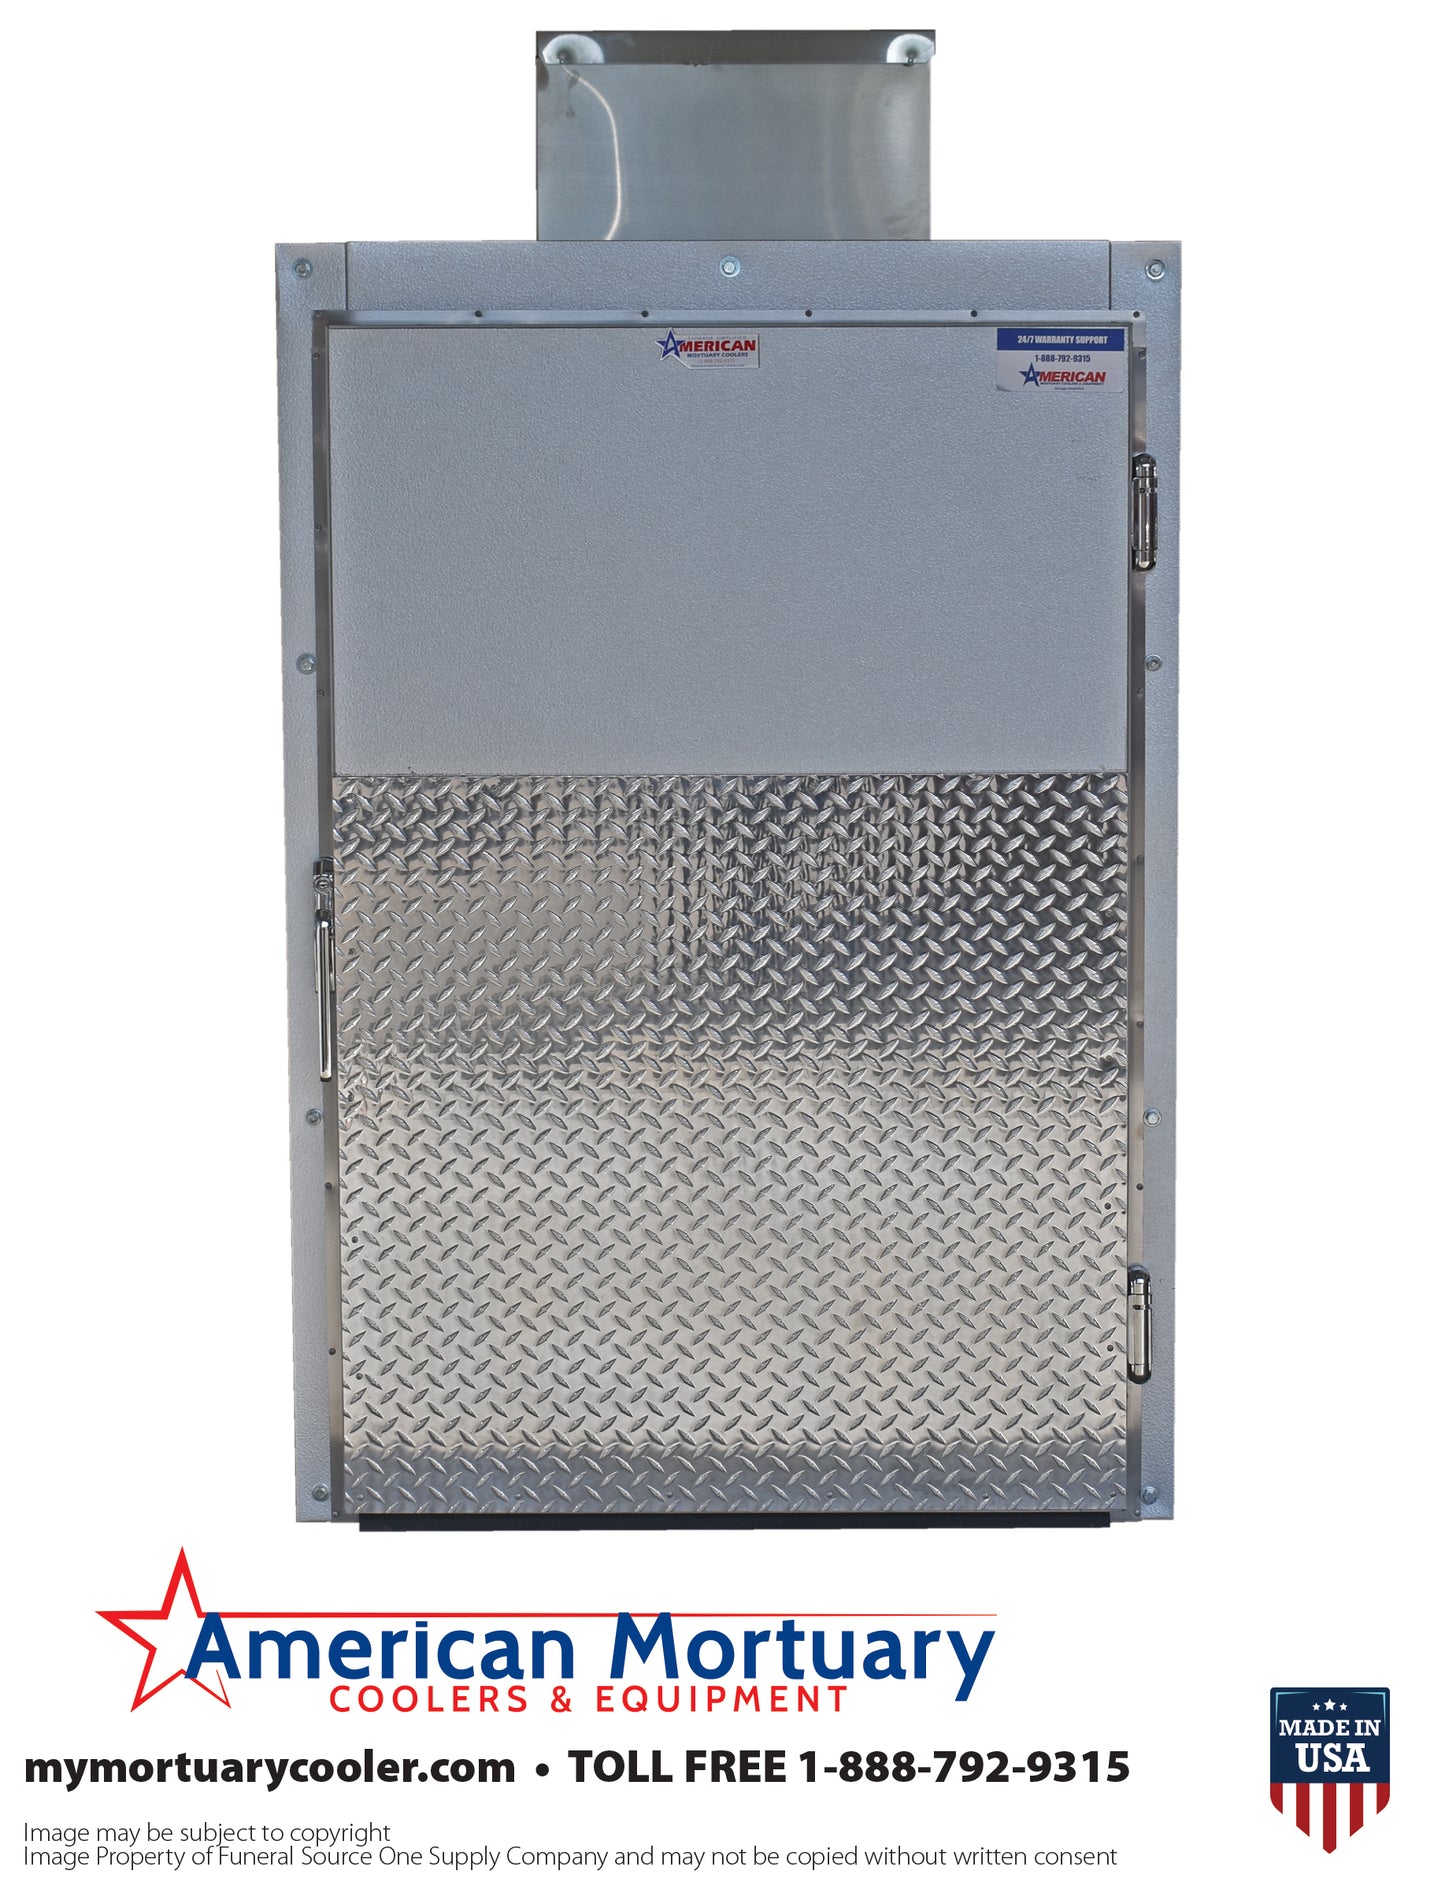 Oversized 2 Body Cot Roll-In Mortuary Cooler AMC Model #2BRX